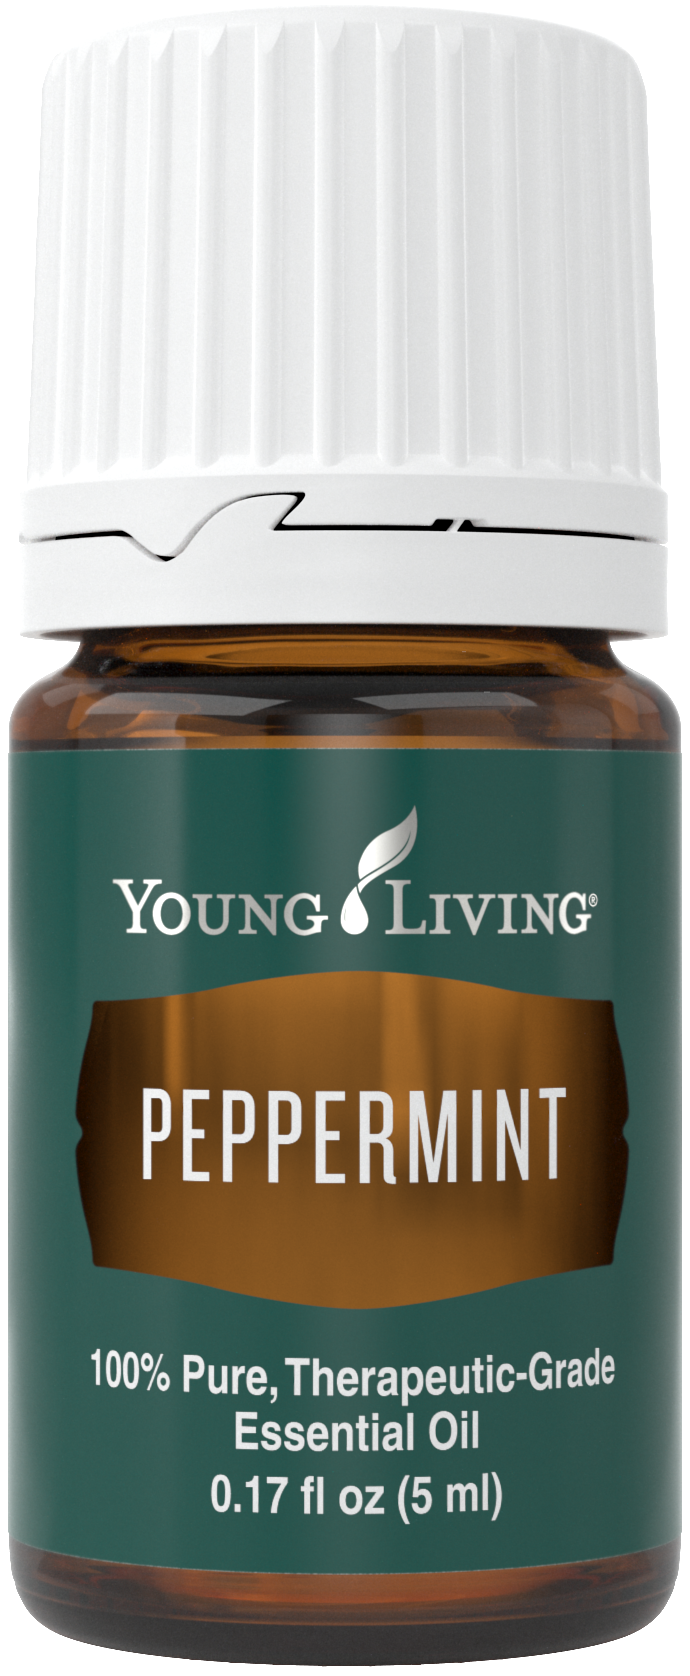 Peppermint 5ml Silo.png